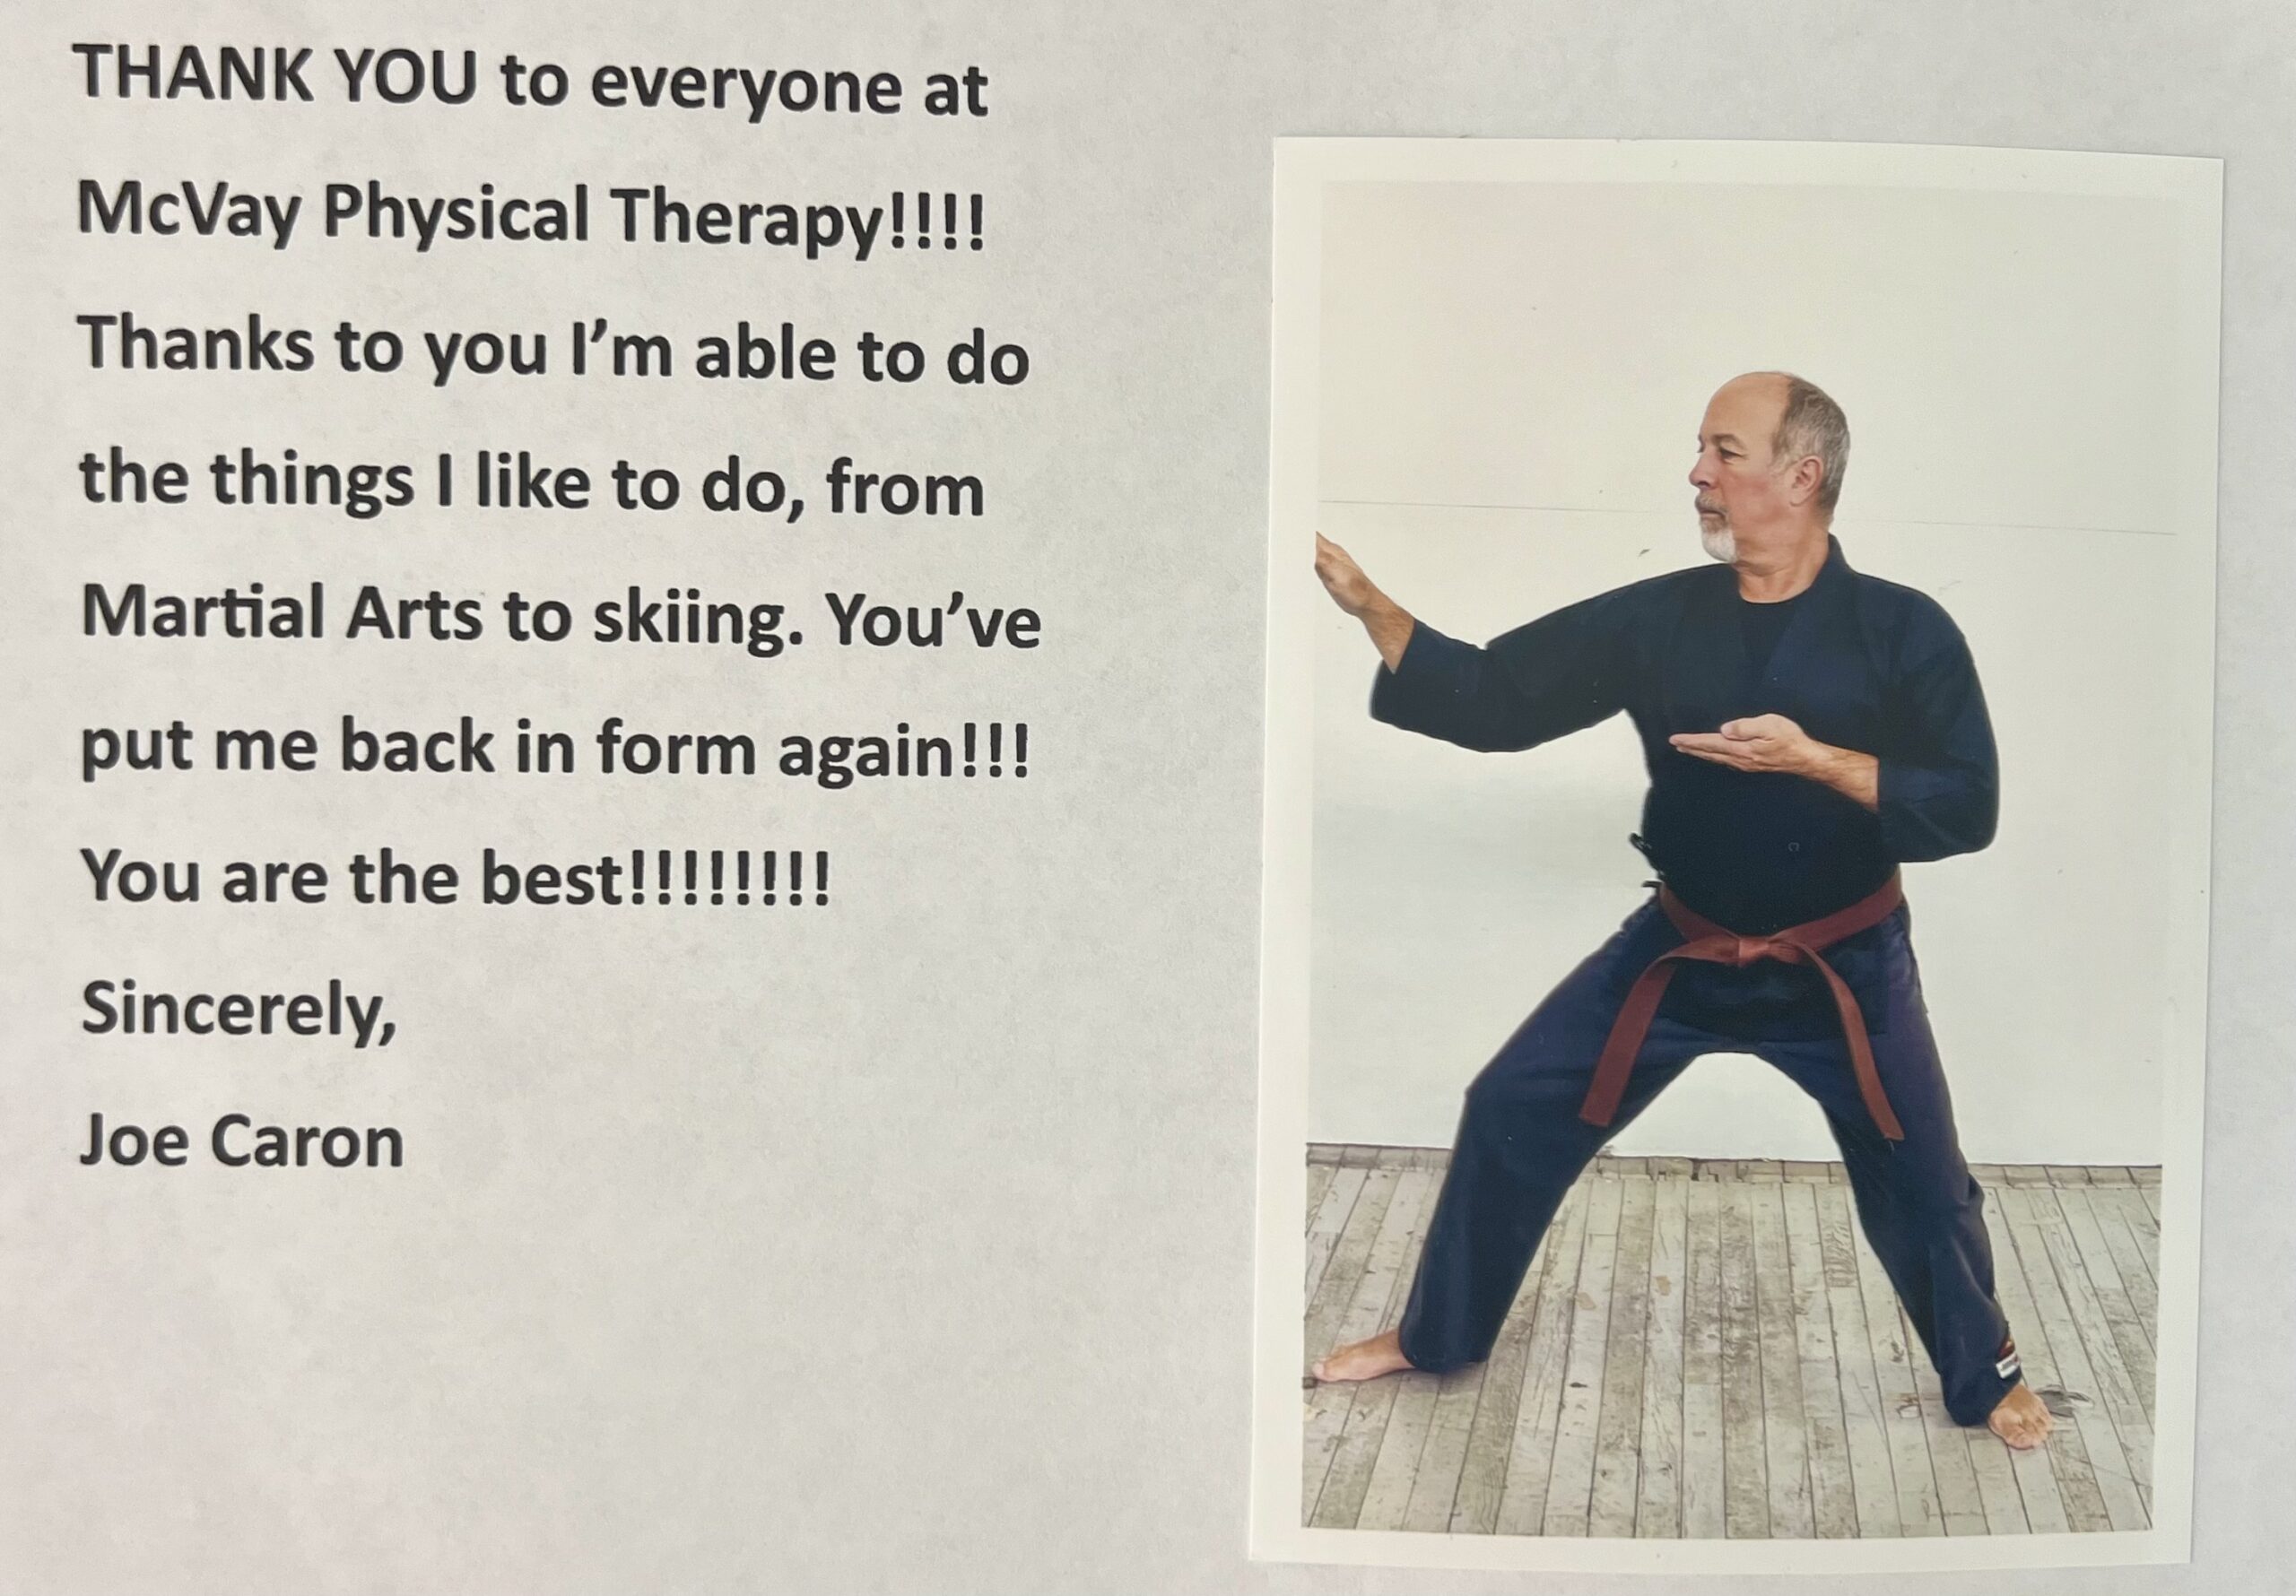 Back to Martial Arts